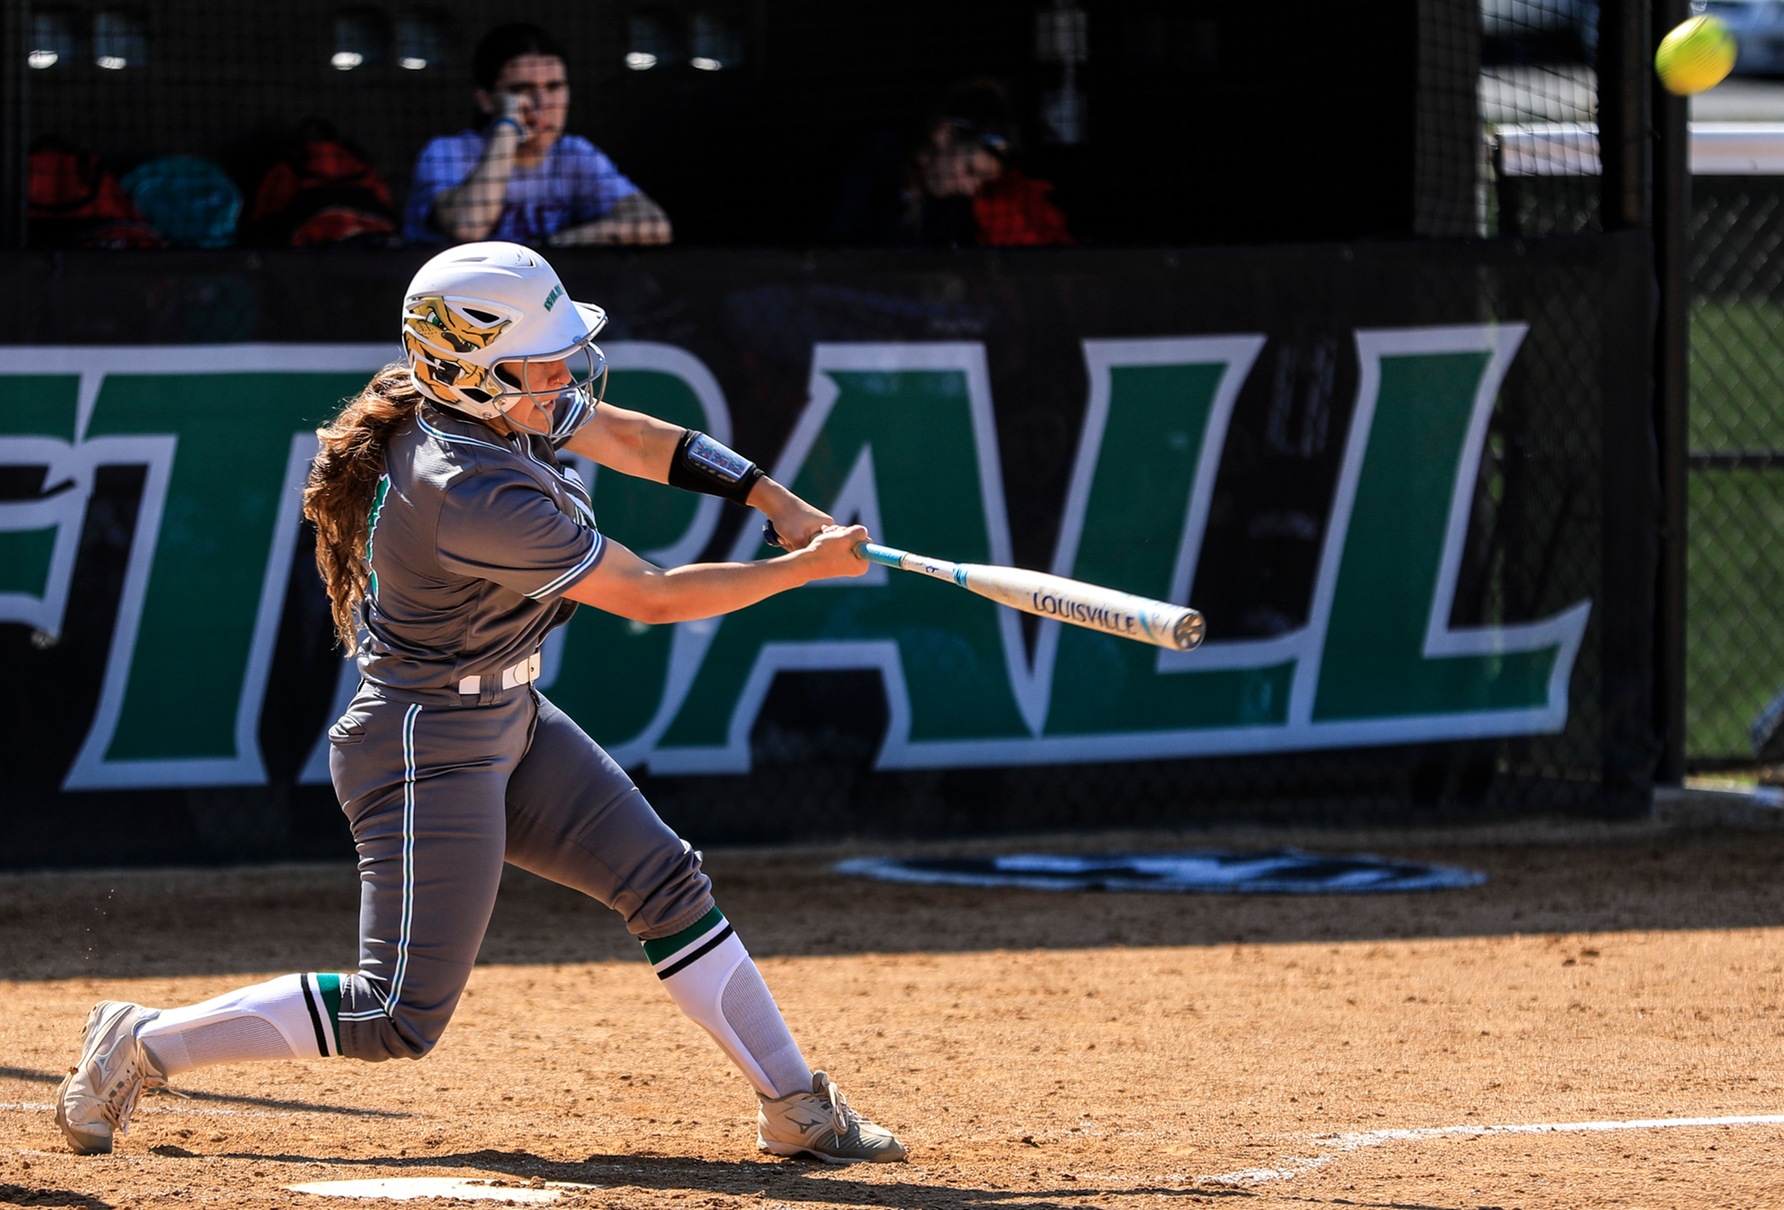 Copyright 2019; Wilmington University. All rights reserved. Photo of Annie Davila launching her fifth homer of the season in game one. Photo by Chris Vitale. April 16, 2019 vs. Nyack.